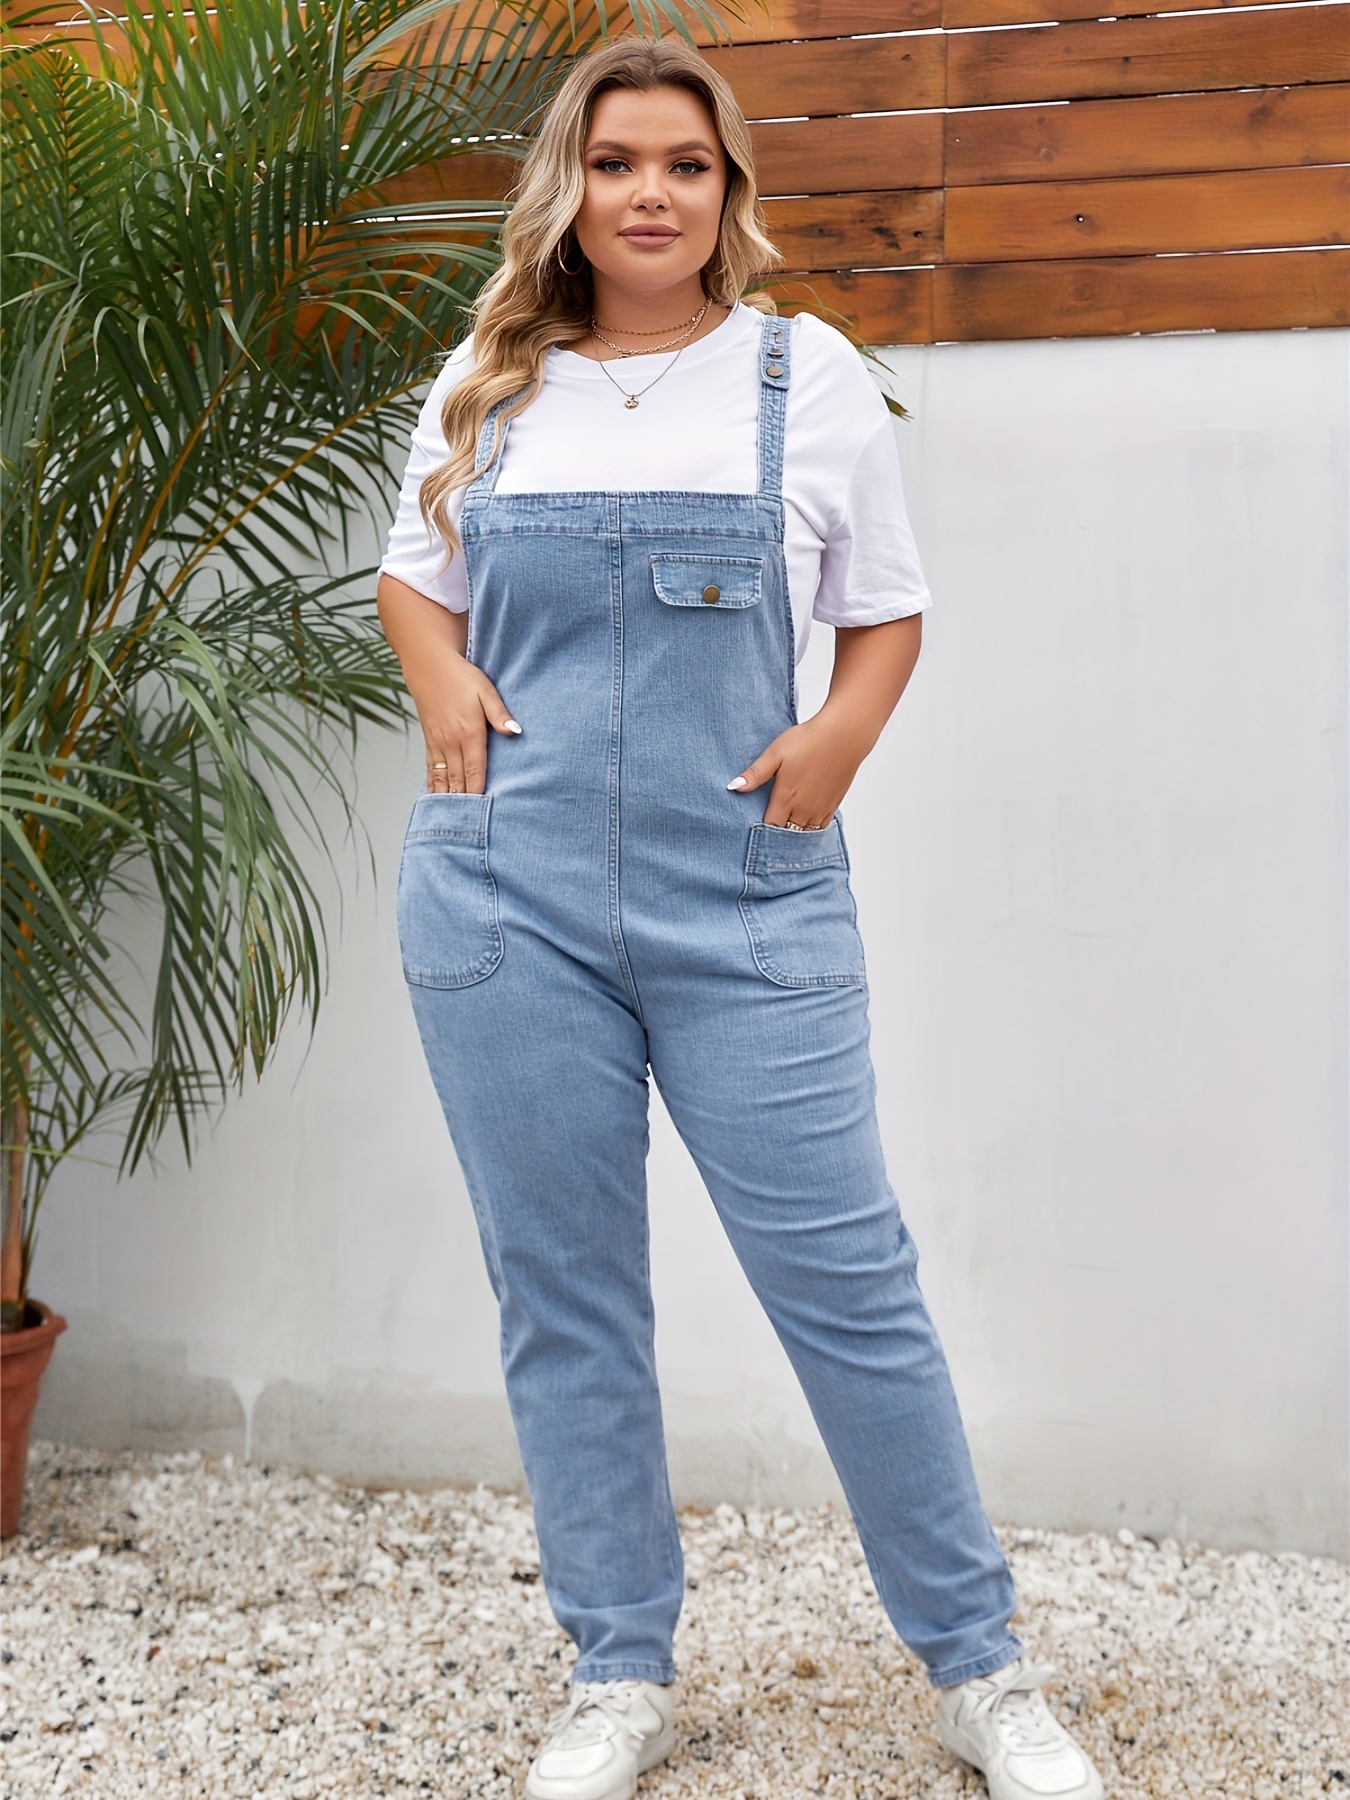 Women's Knotted Jersey Dungarees Spring Summer